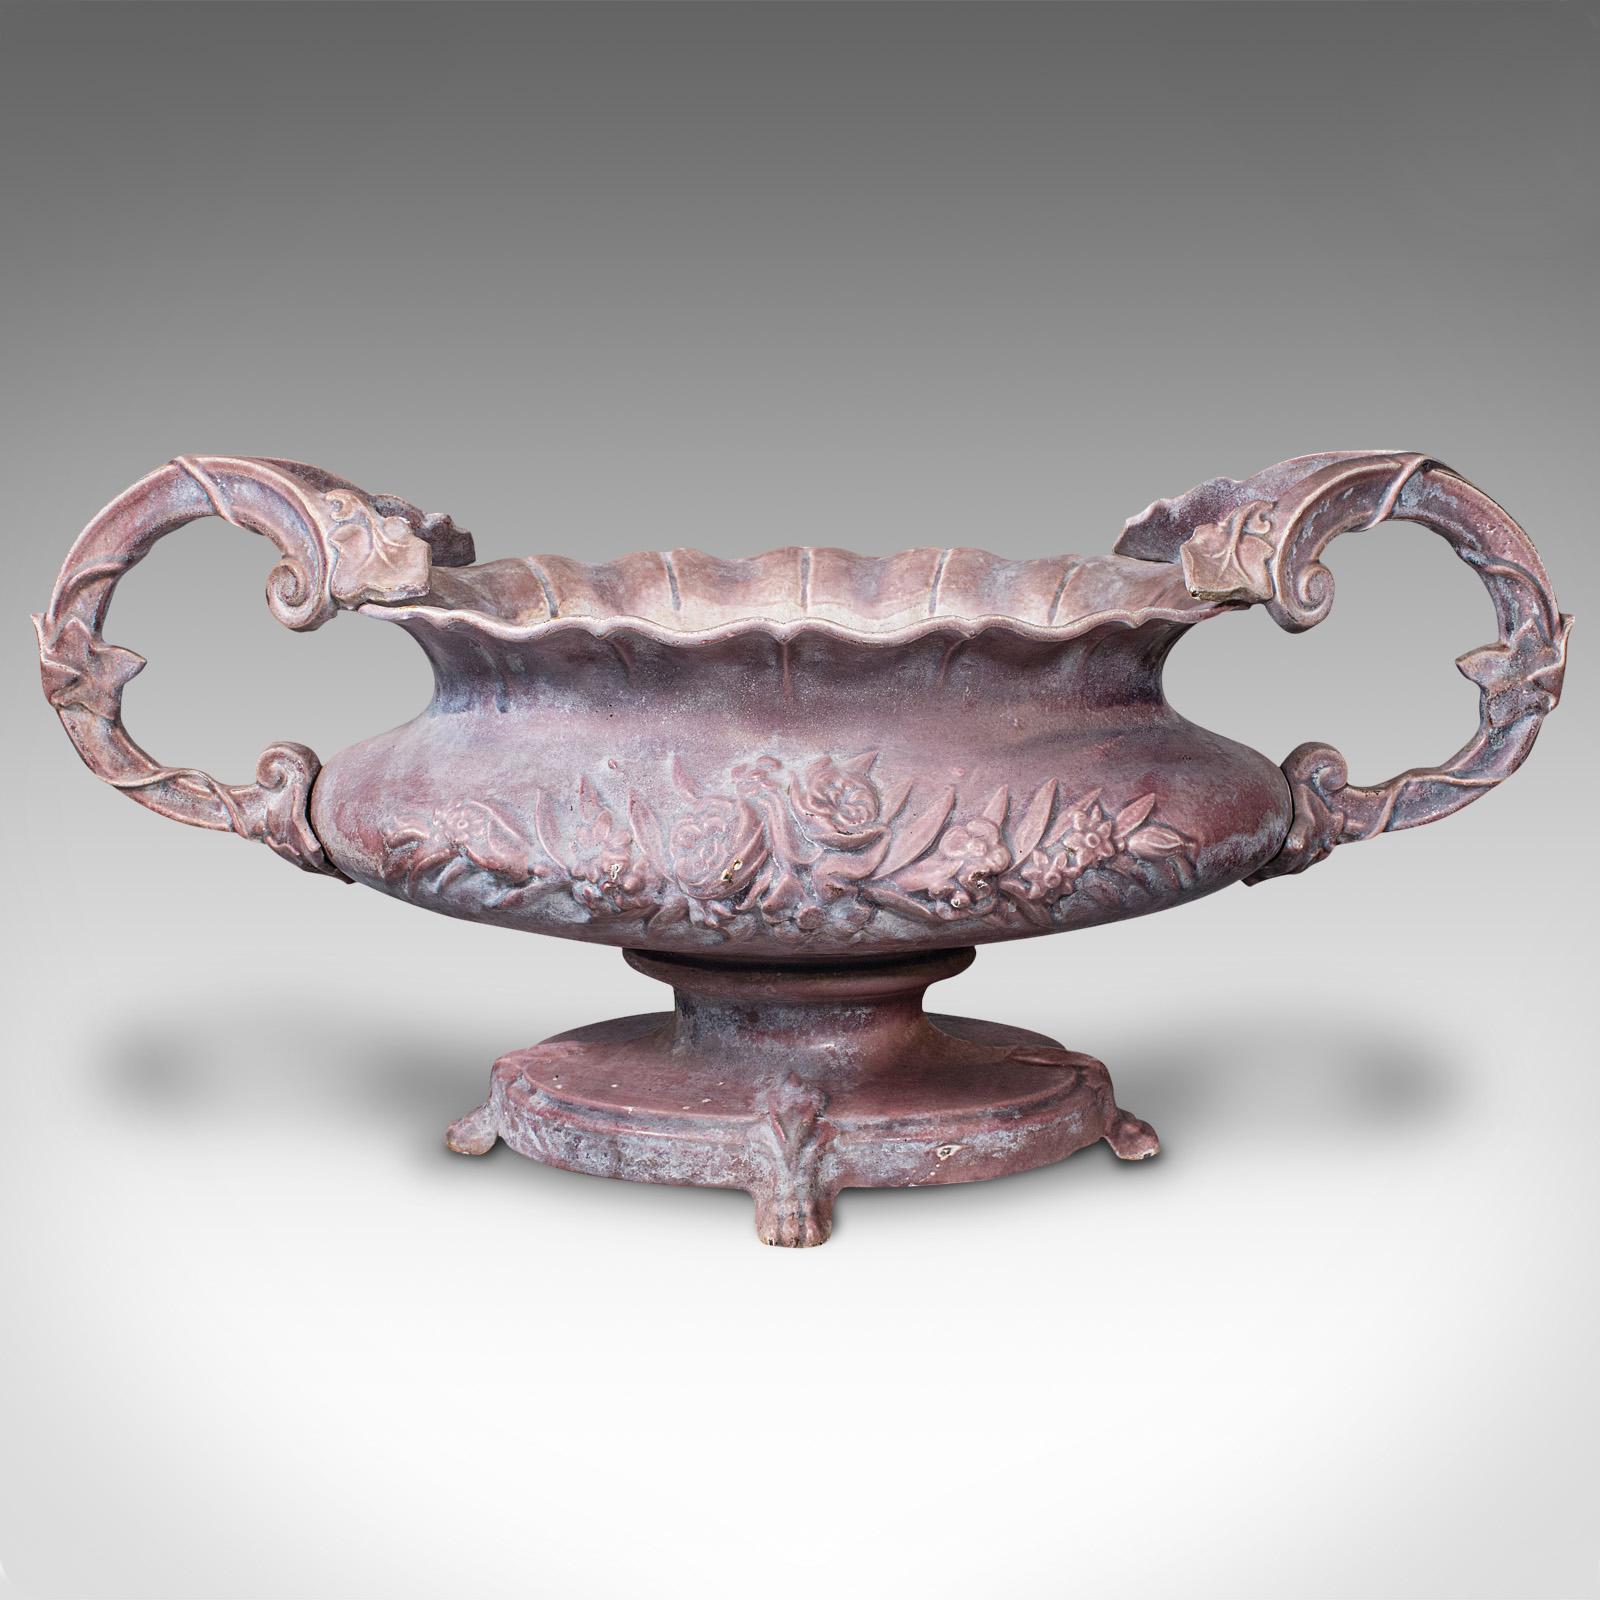 This is a large antique ornamental planter. An English, heavy enamelled cast iron jardiniere, dating to the early Victorian period, circa 1850.

Graced with bold form and of generous size, influenced by the exuberance of the Great